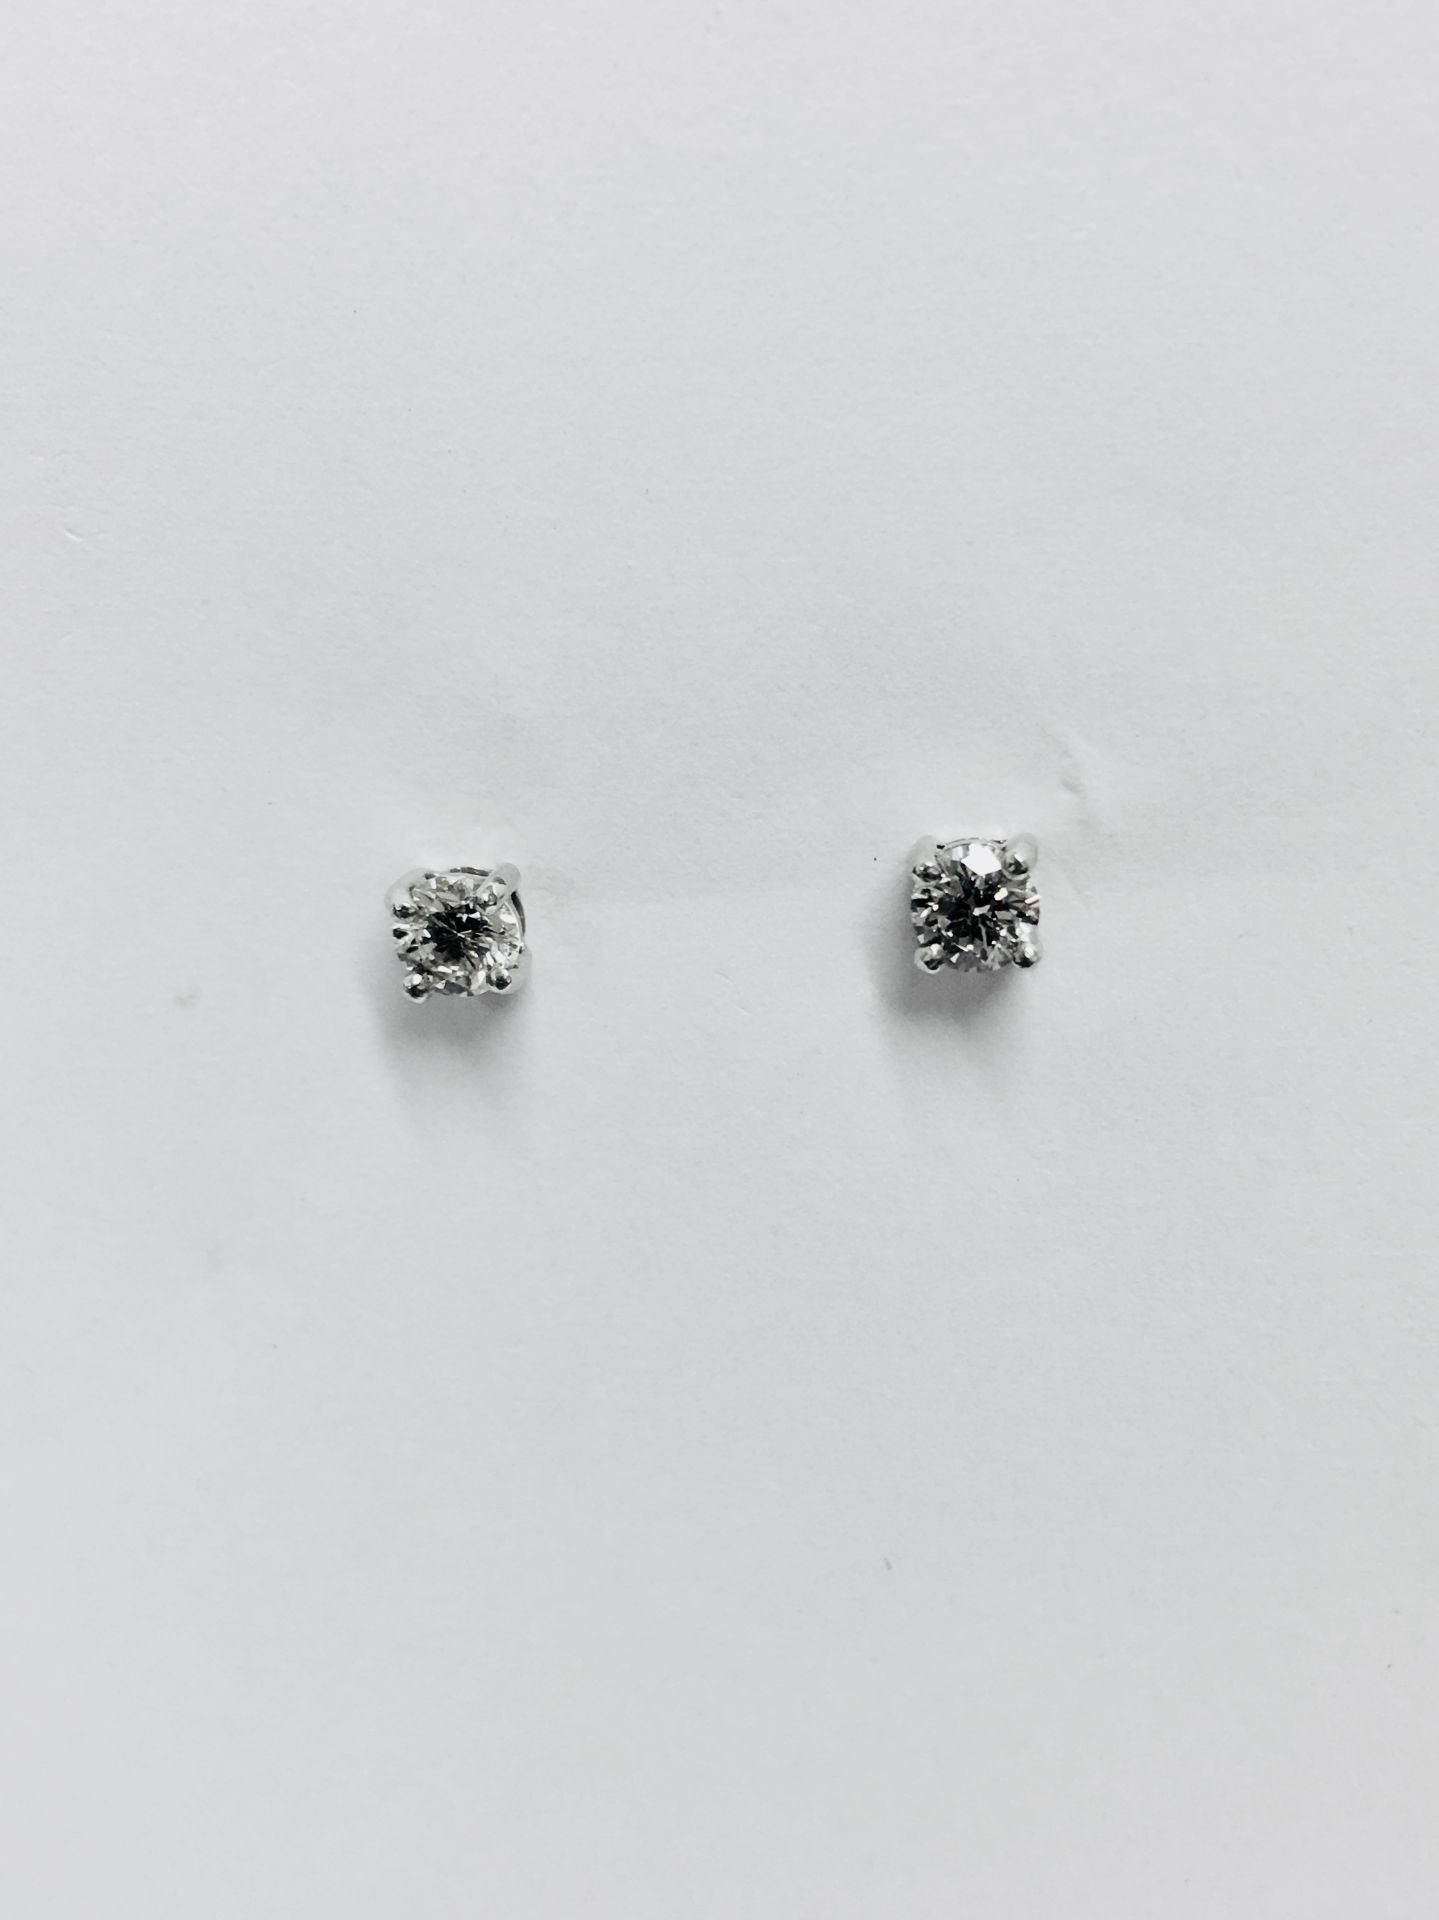 0.40ct Solitaire diamond stud earrings set with brilliant cut diamonds - Image 4 of 4